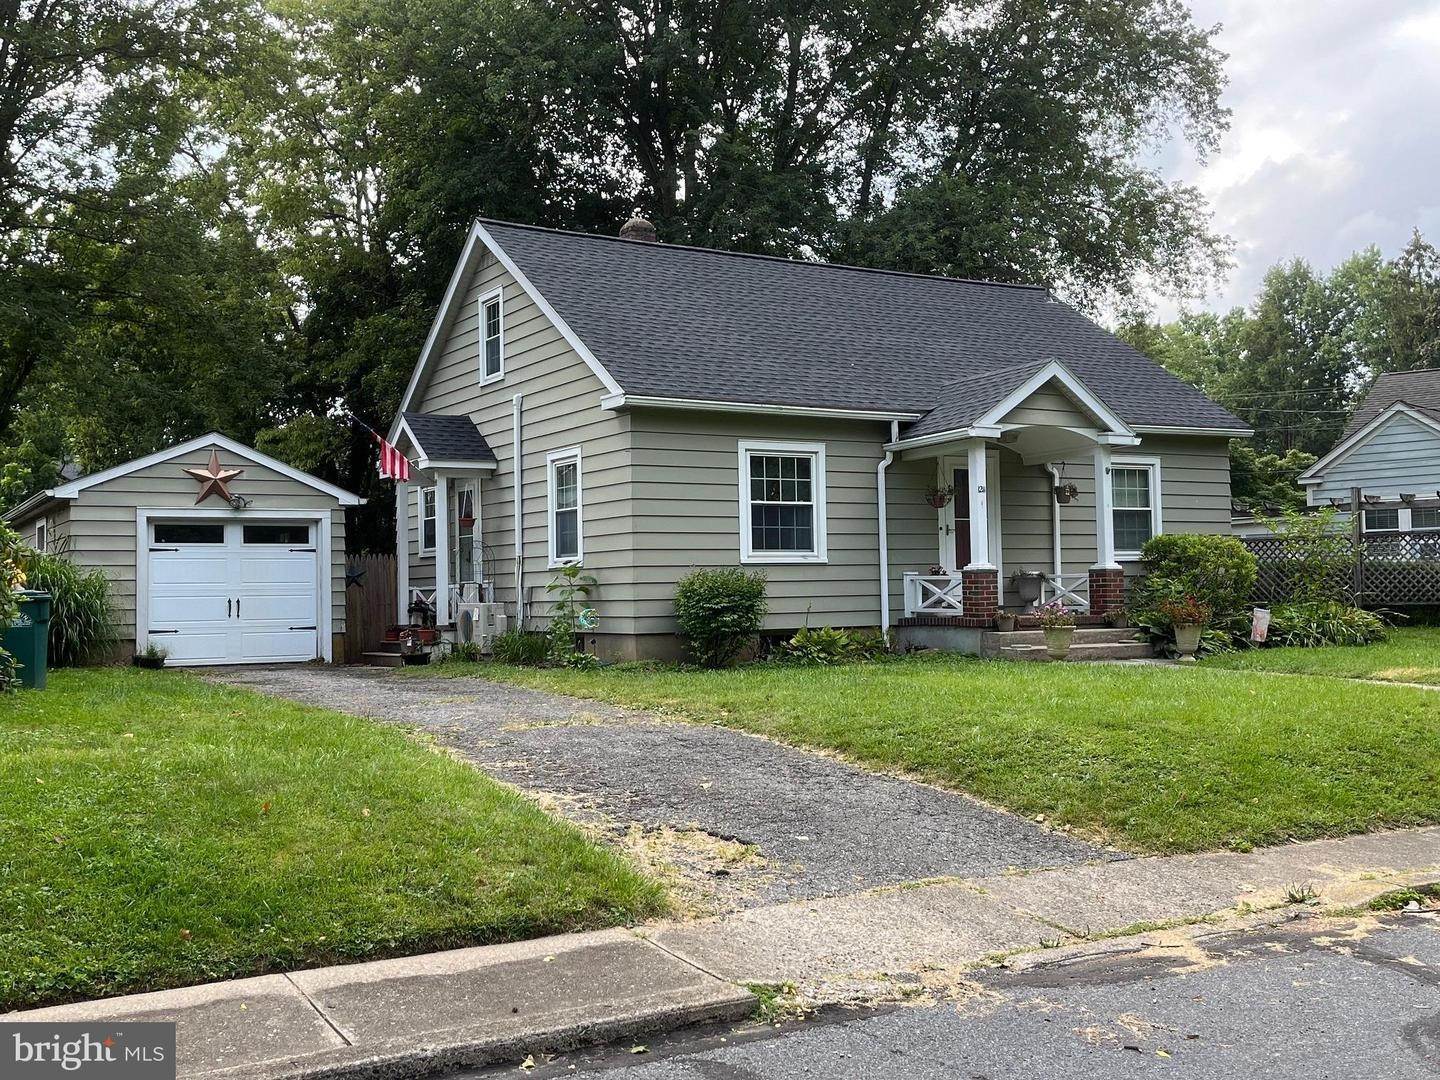 Single Family at Riegelsville, PA 18077